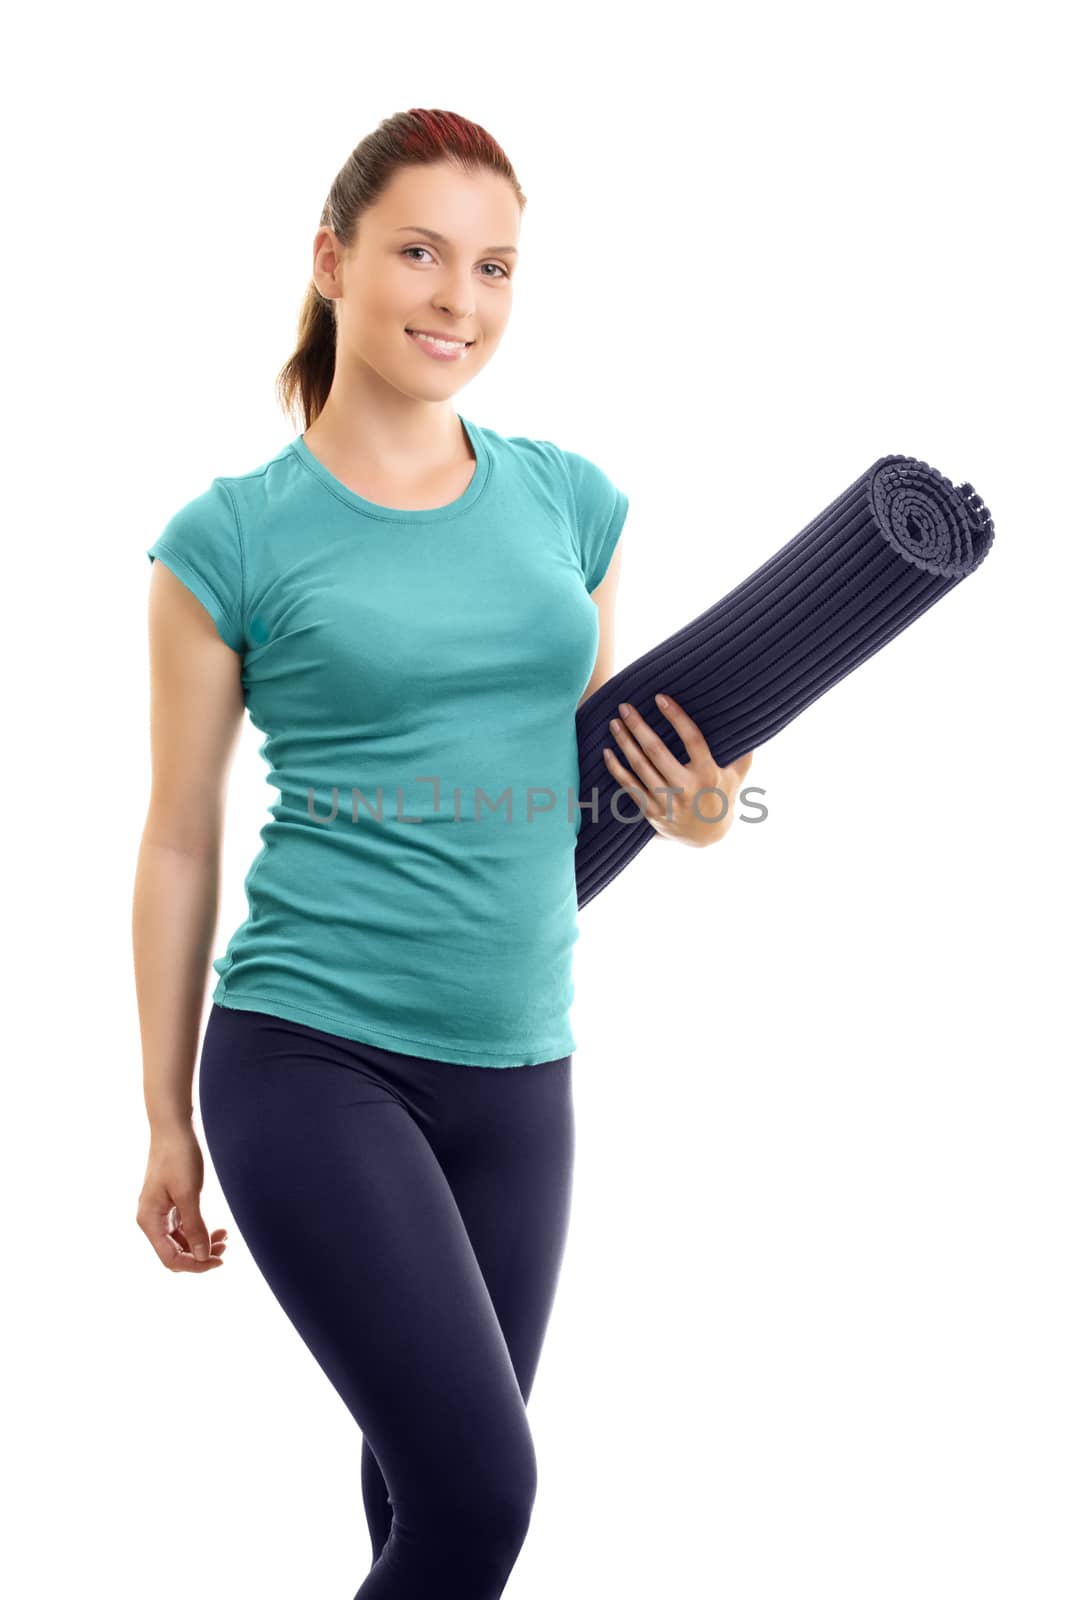 A portrait of a smiling beautiful fit girl holding a workout mat, isolated on a white background.